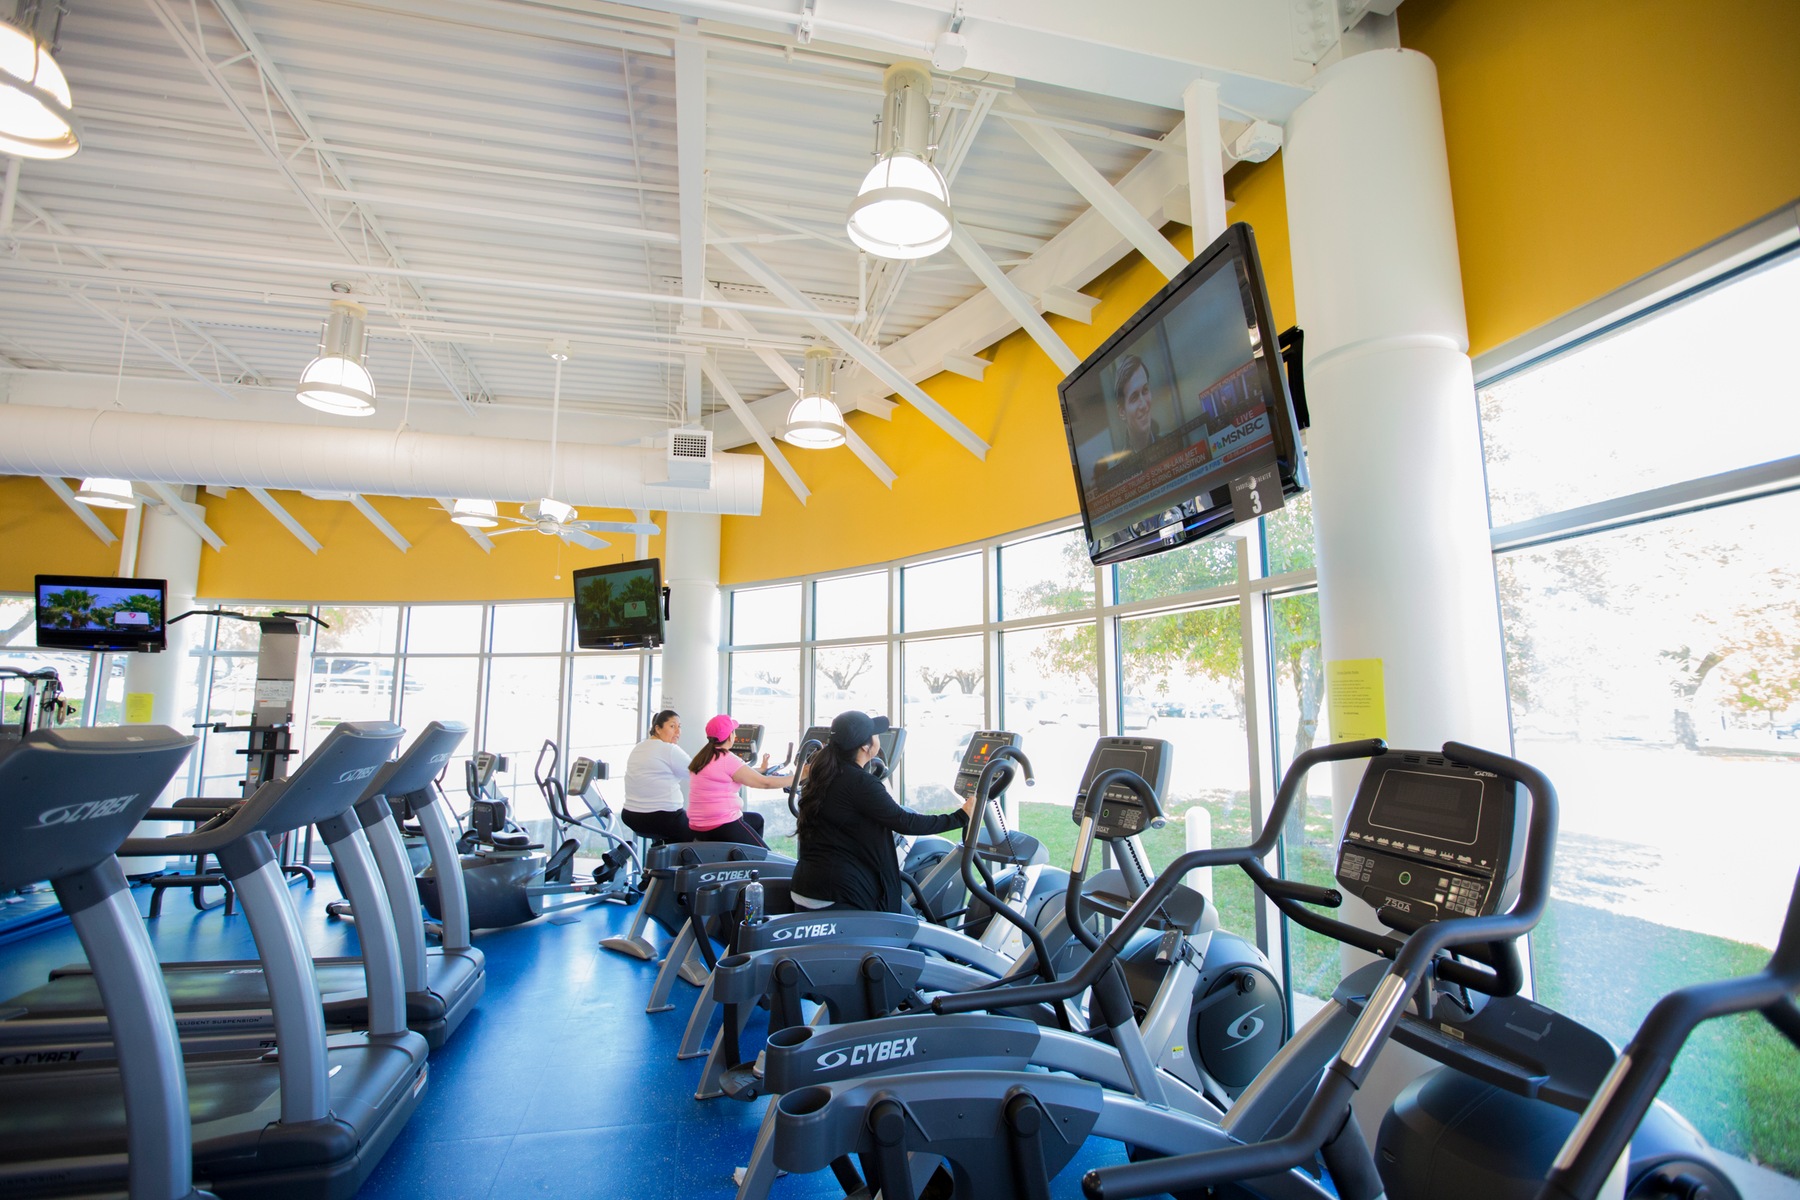 Beautiful view from the treadmills and elipticals.